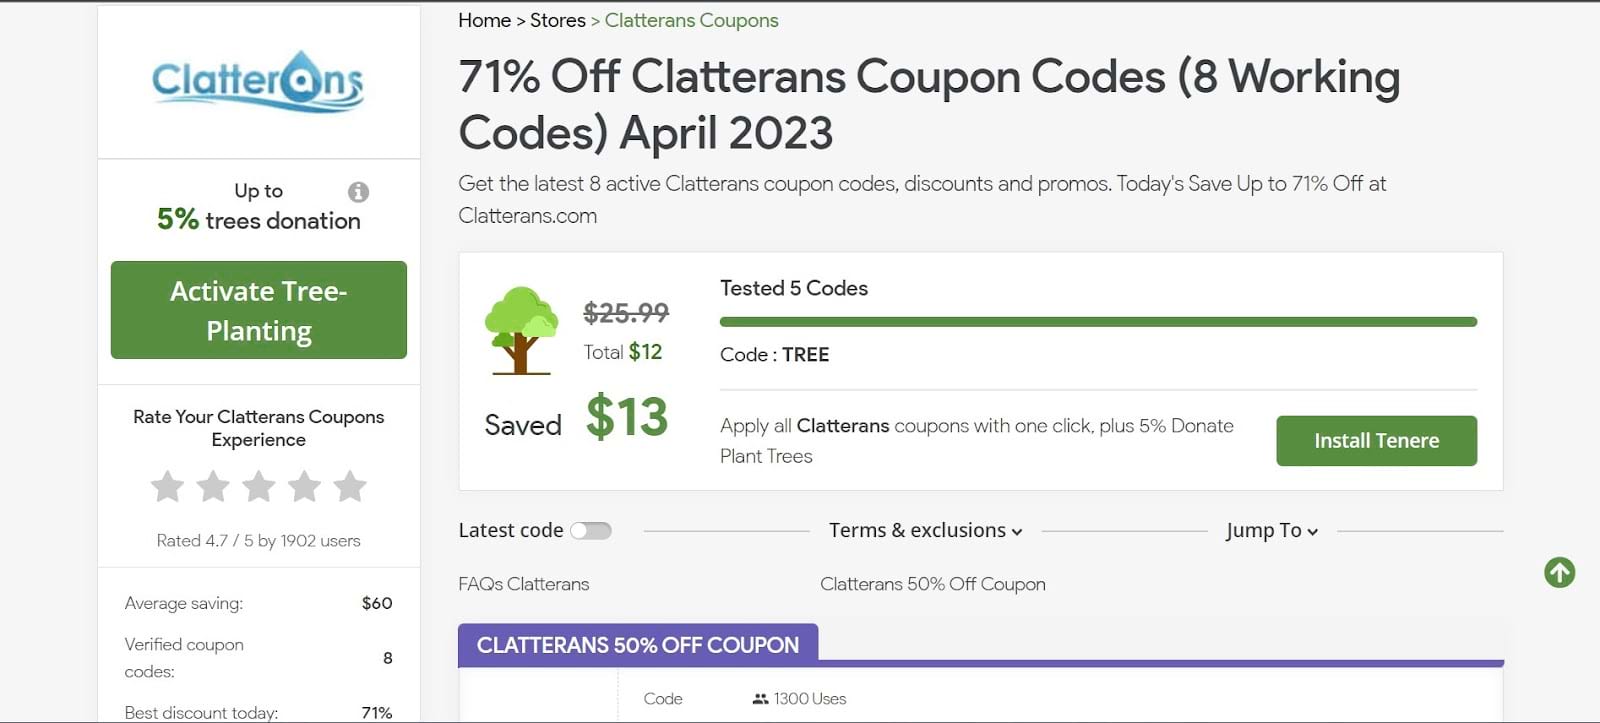 How To Use Clatterans Coupon Code 3